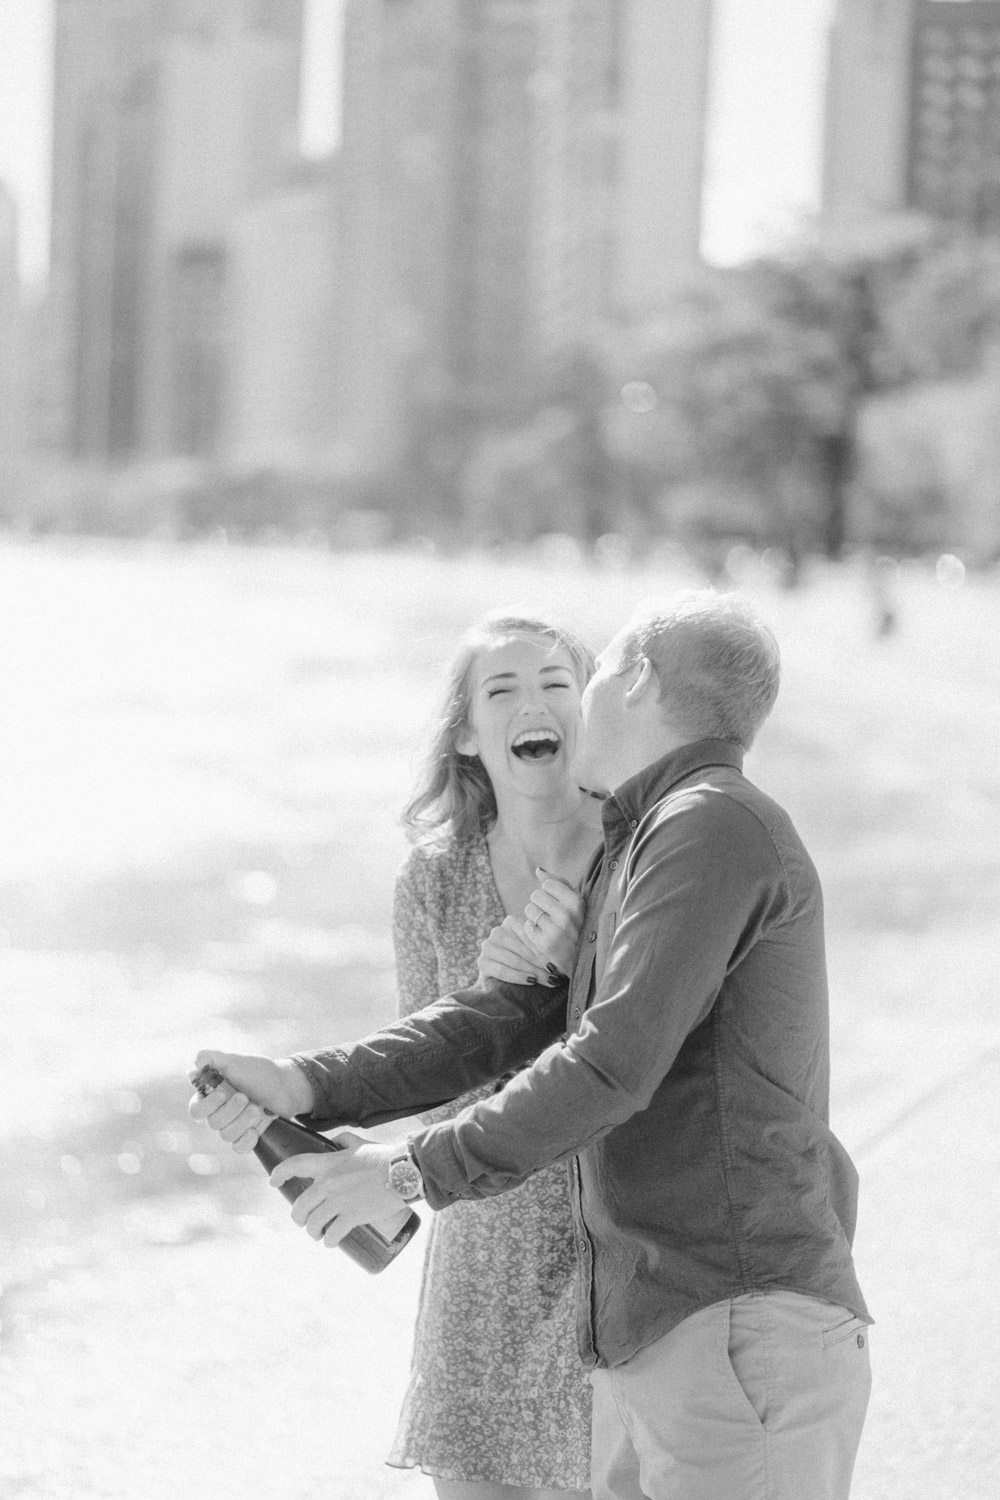 north avenue beach chicago engagement session photographer